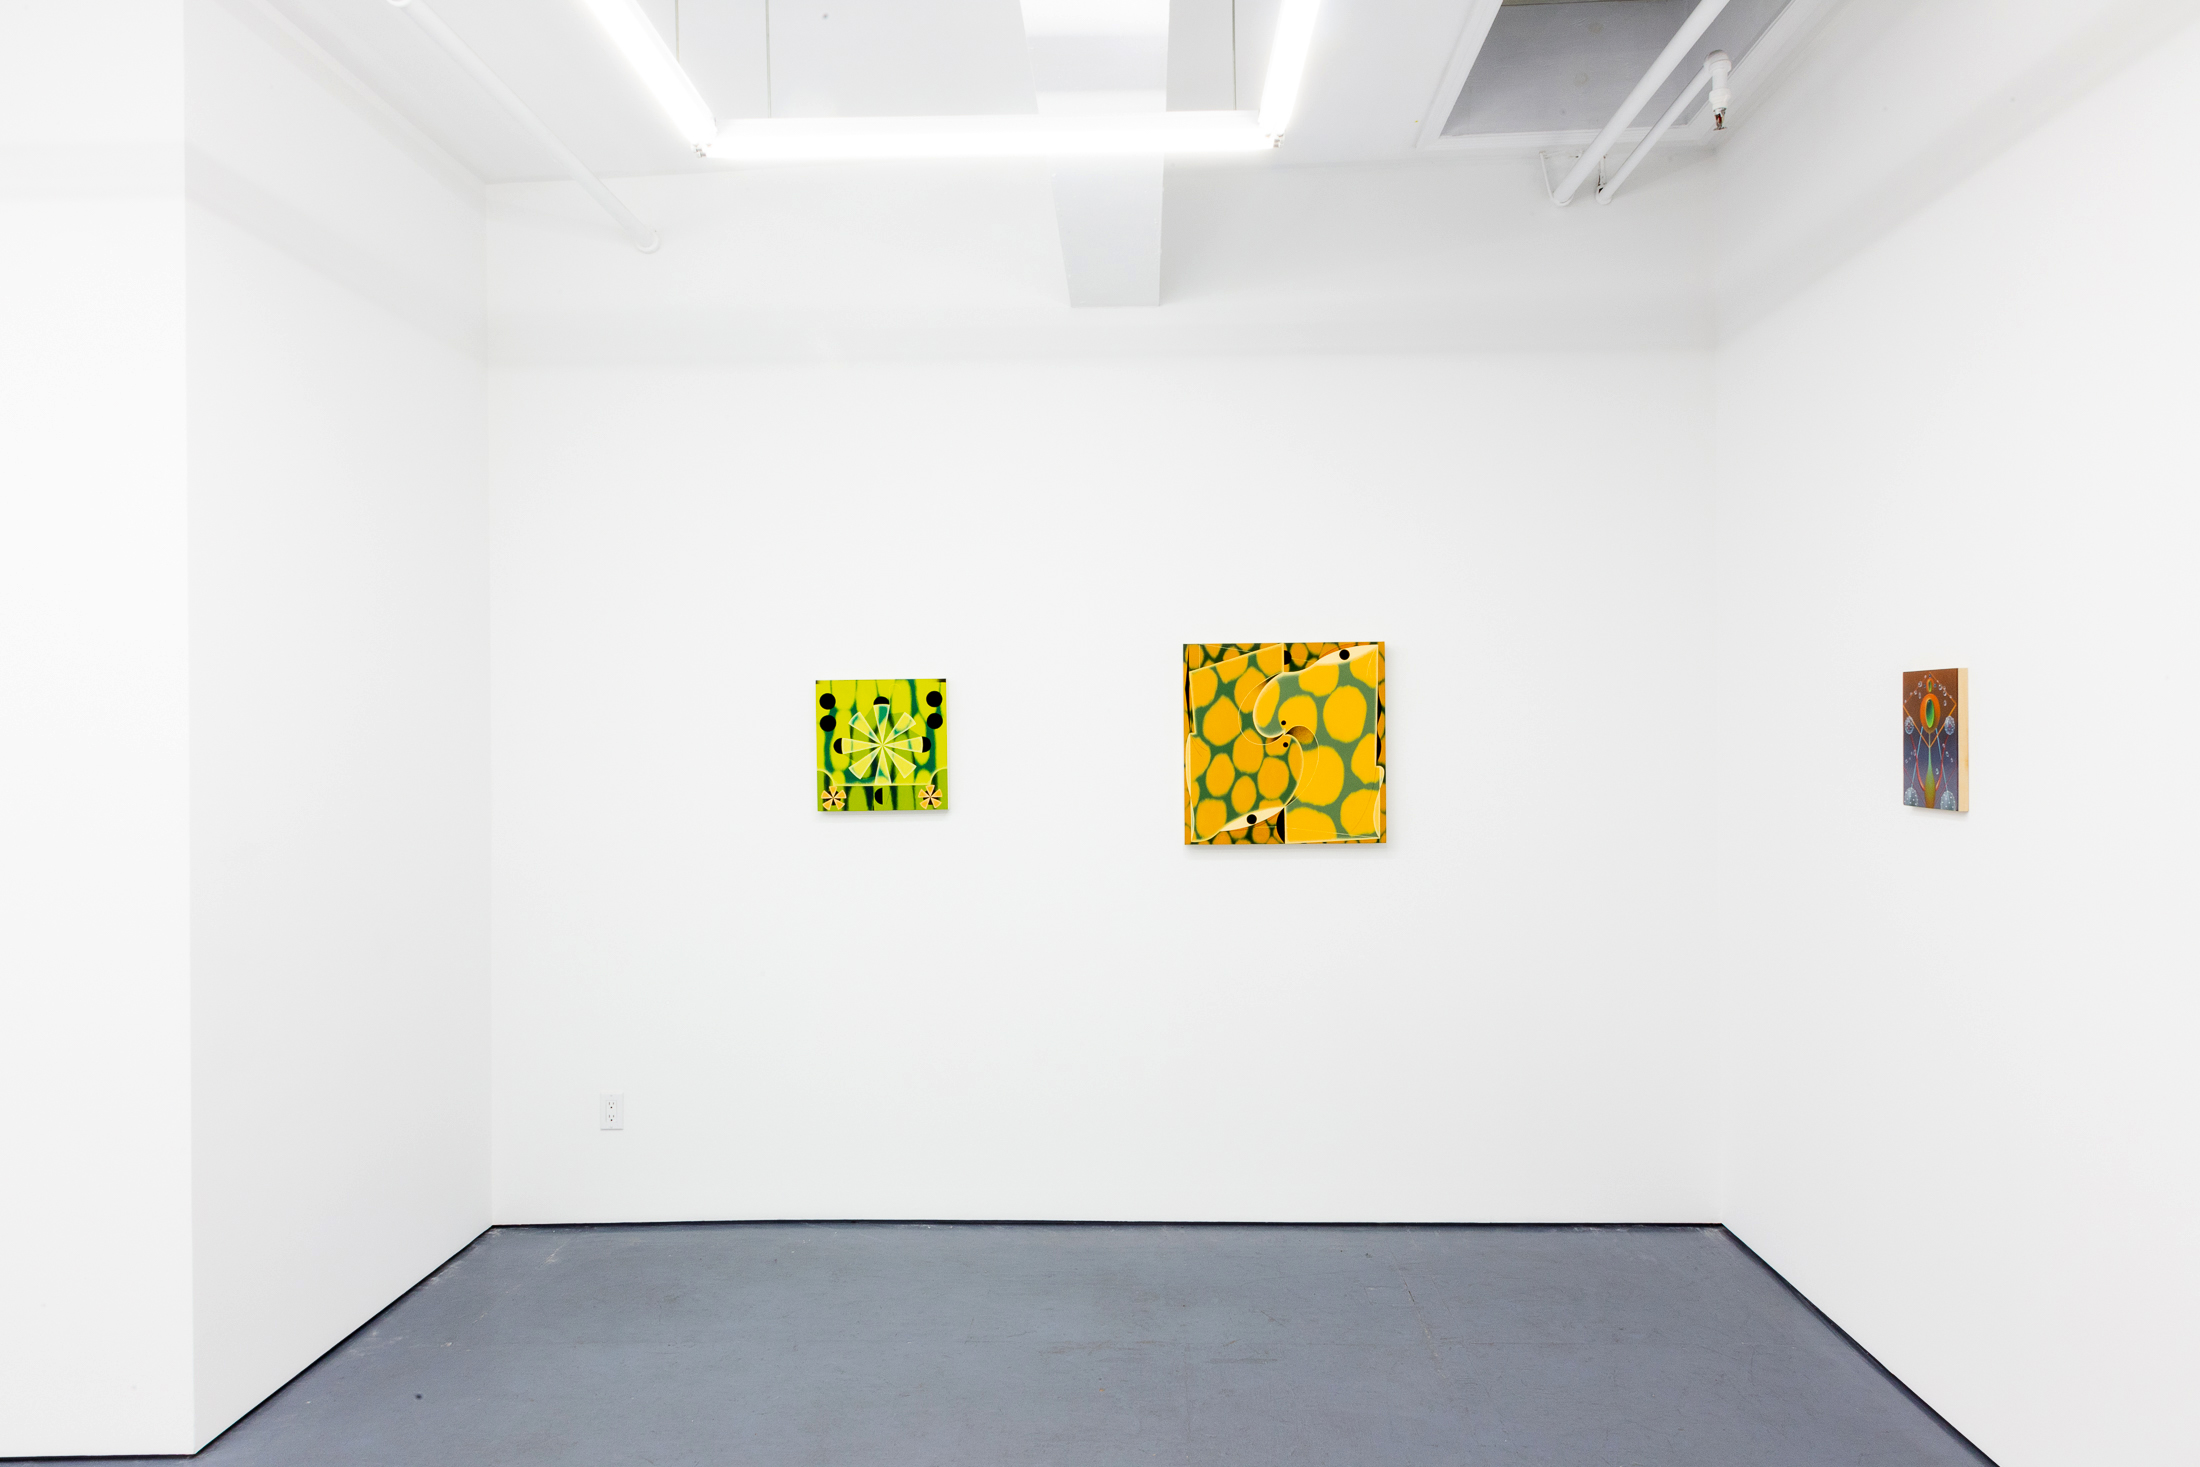  Installation view of Heed by Angela Heisch and Alessandro Keegan at Transmitter 